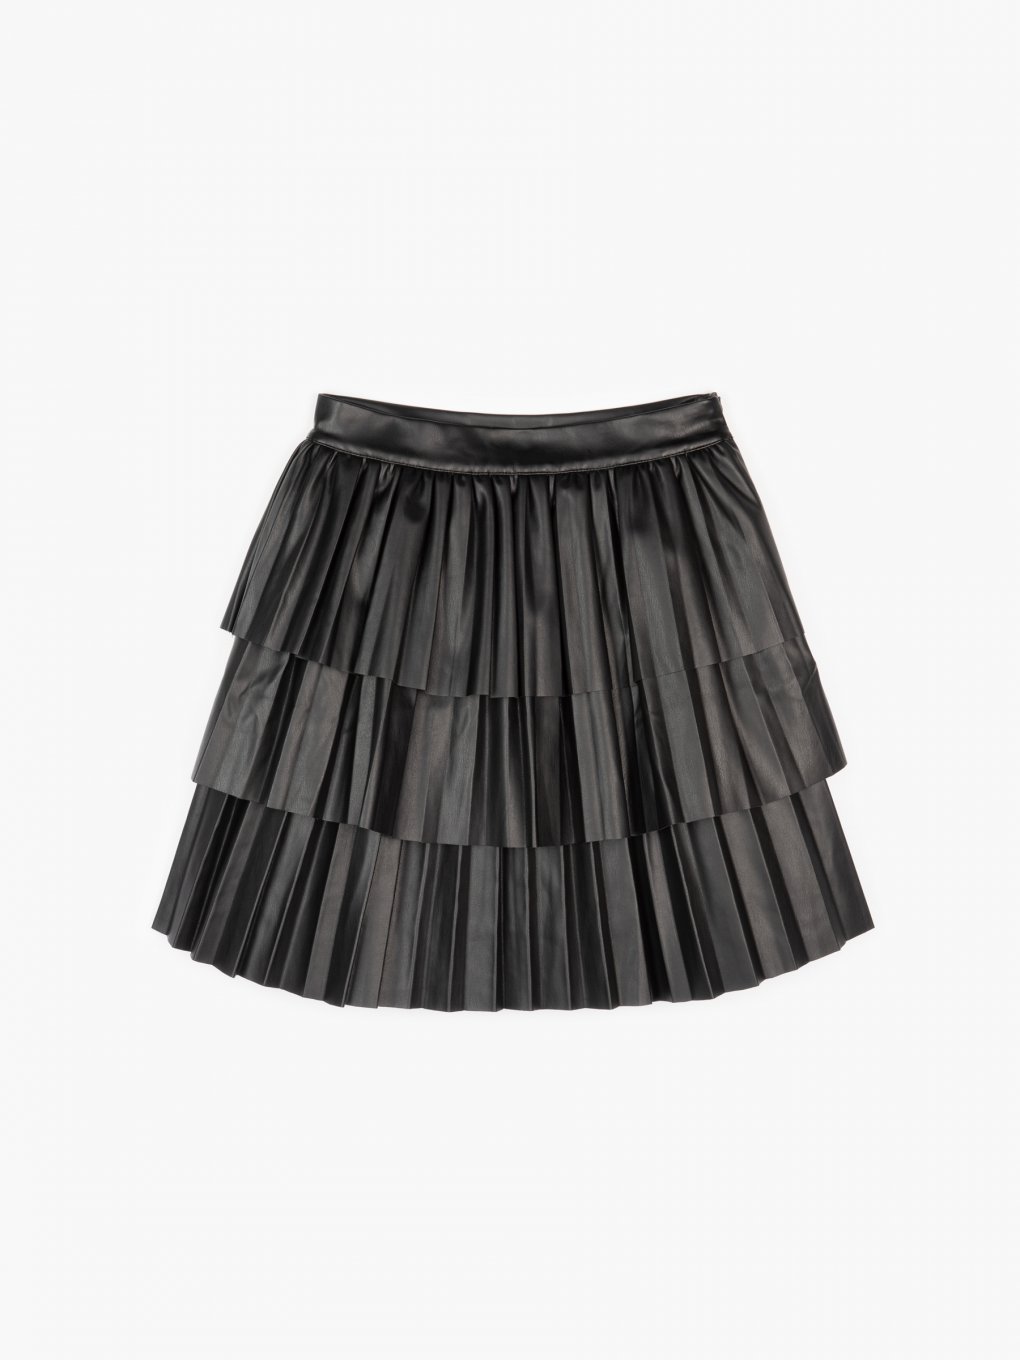 Faux leather mini skirt with ruffles